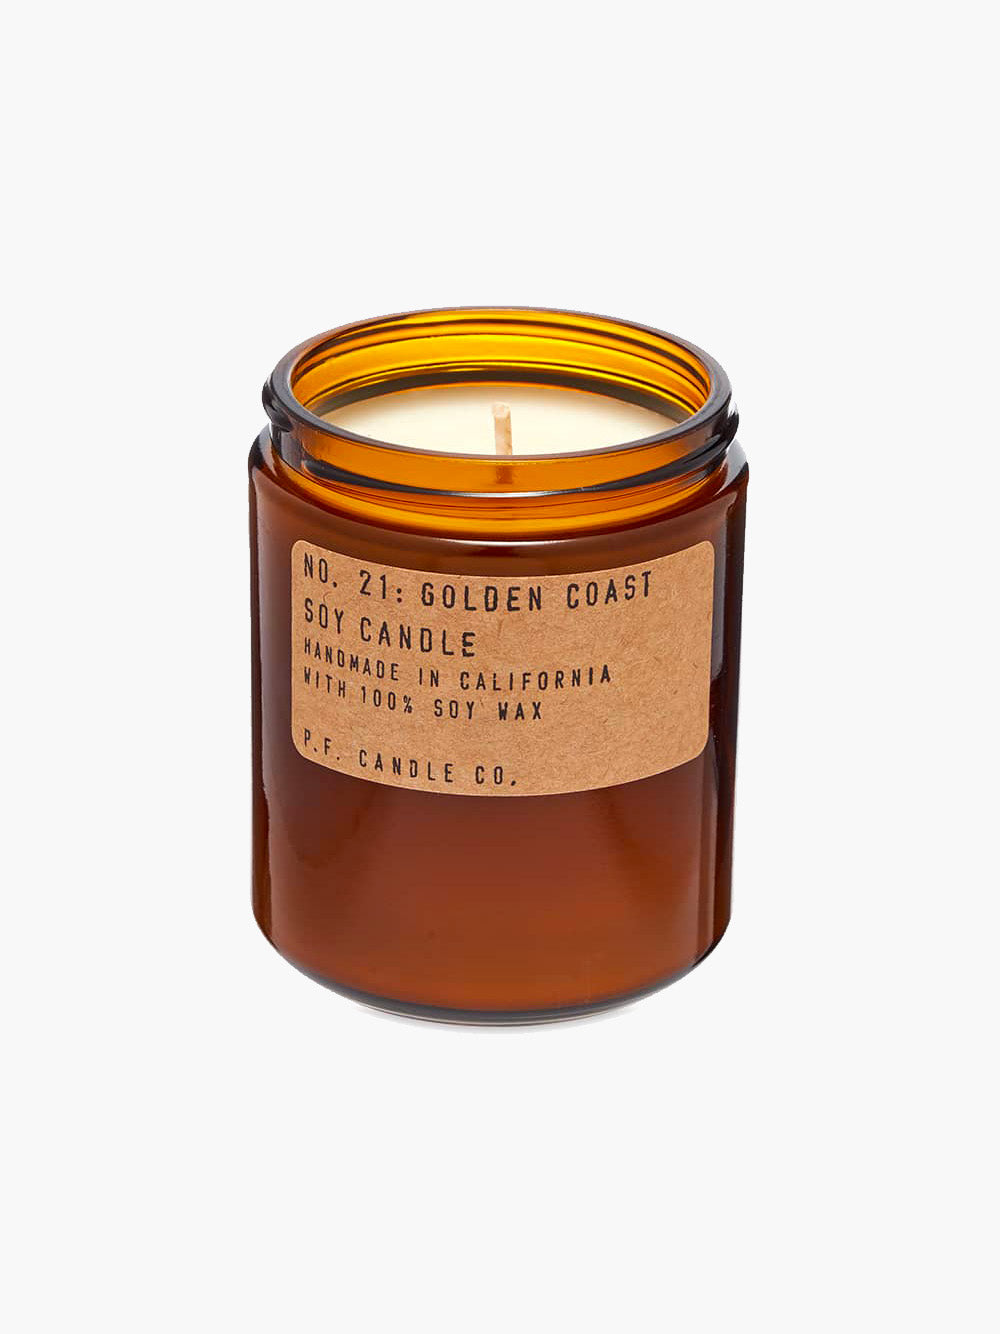 P.F. Candle Co. 204g Soy Candle - No.21 Golden Coast